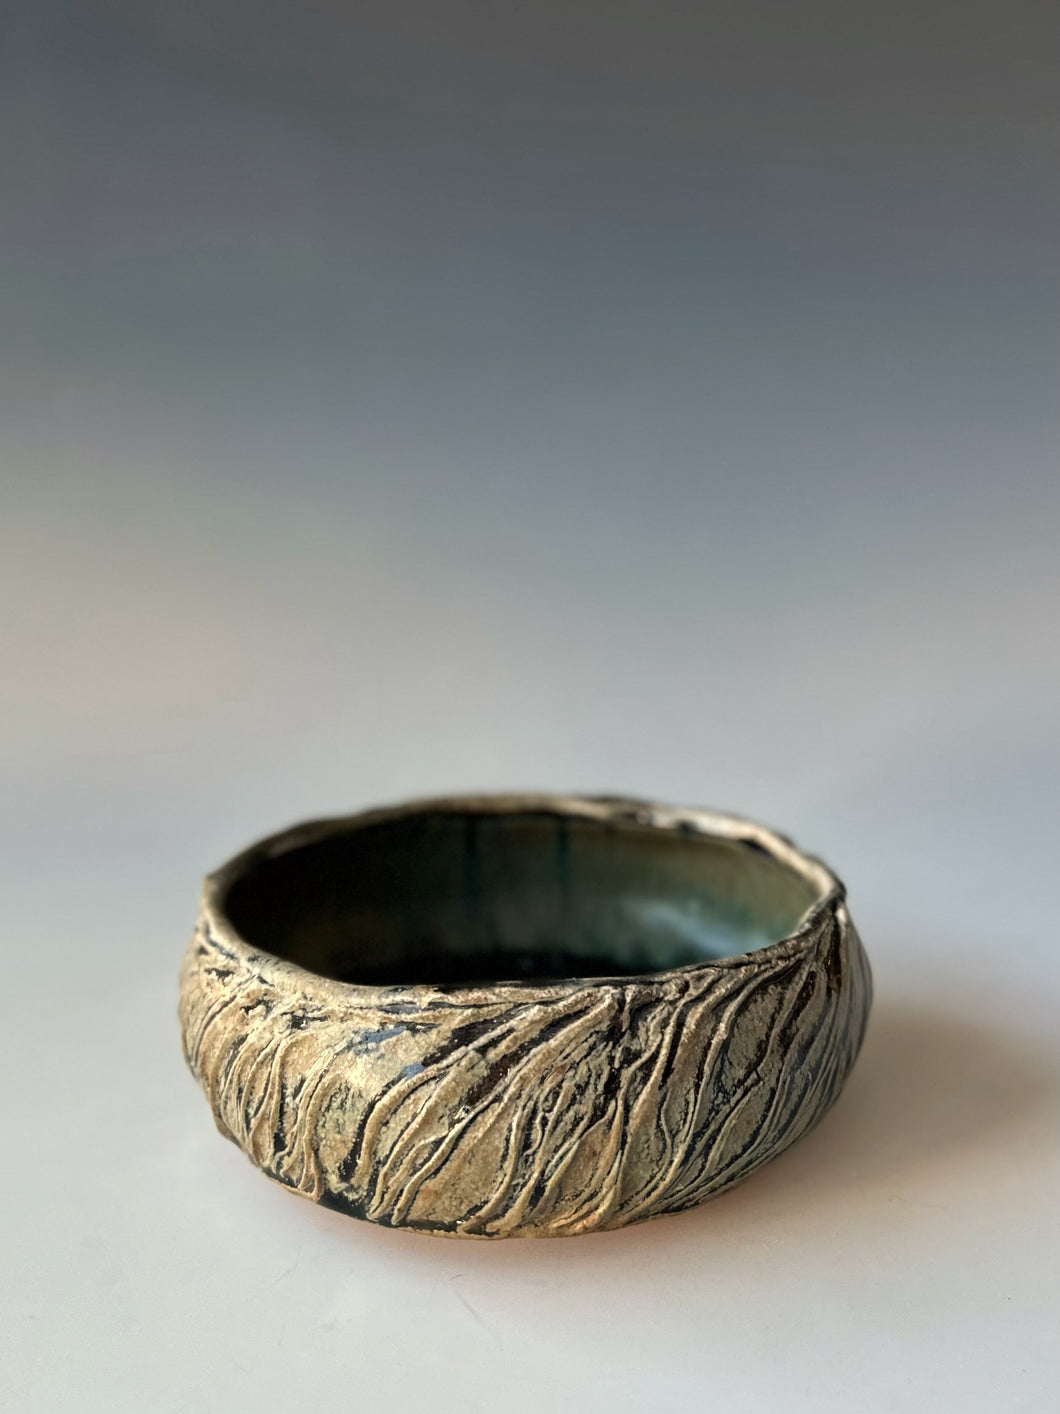 Catch All Bark Texture Bowl by KJ MacAlister